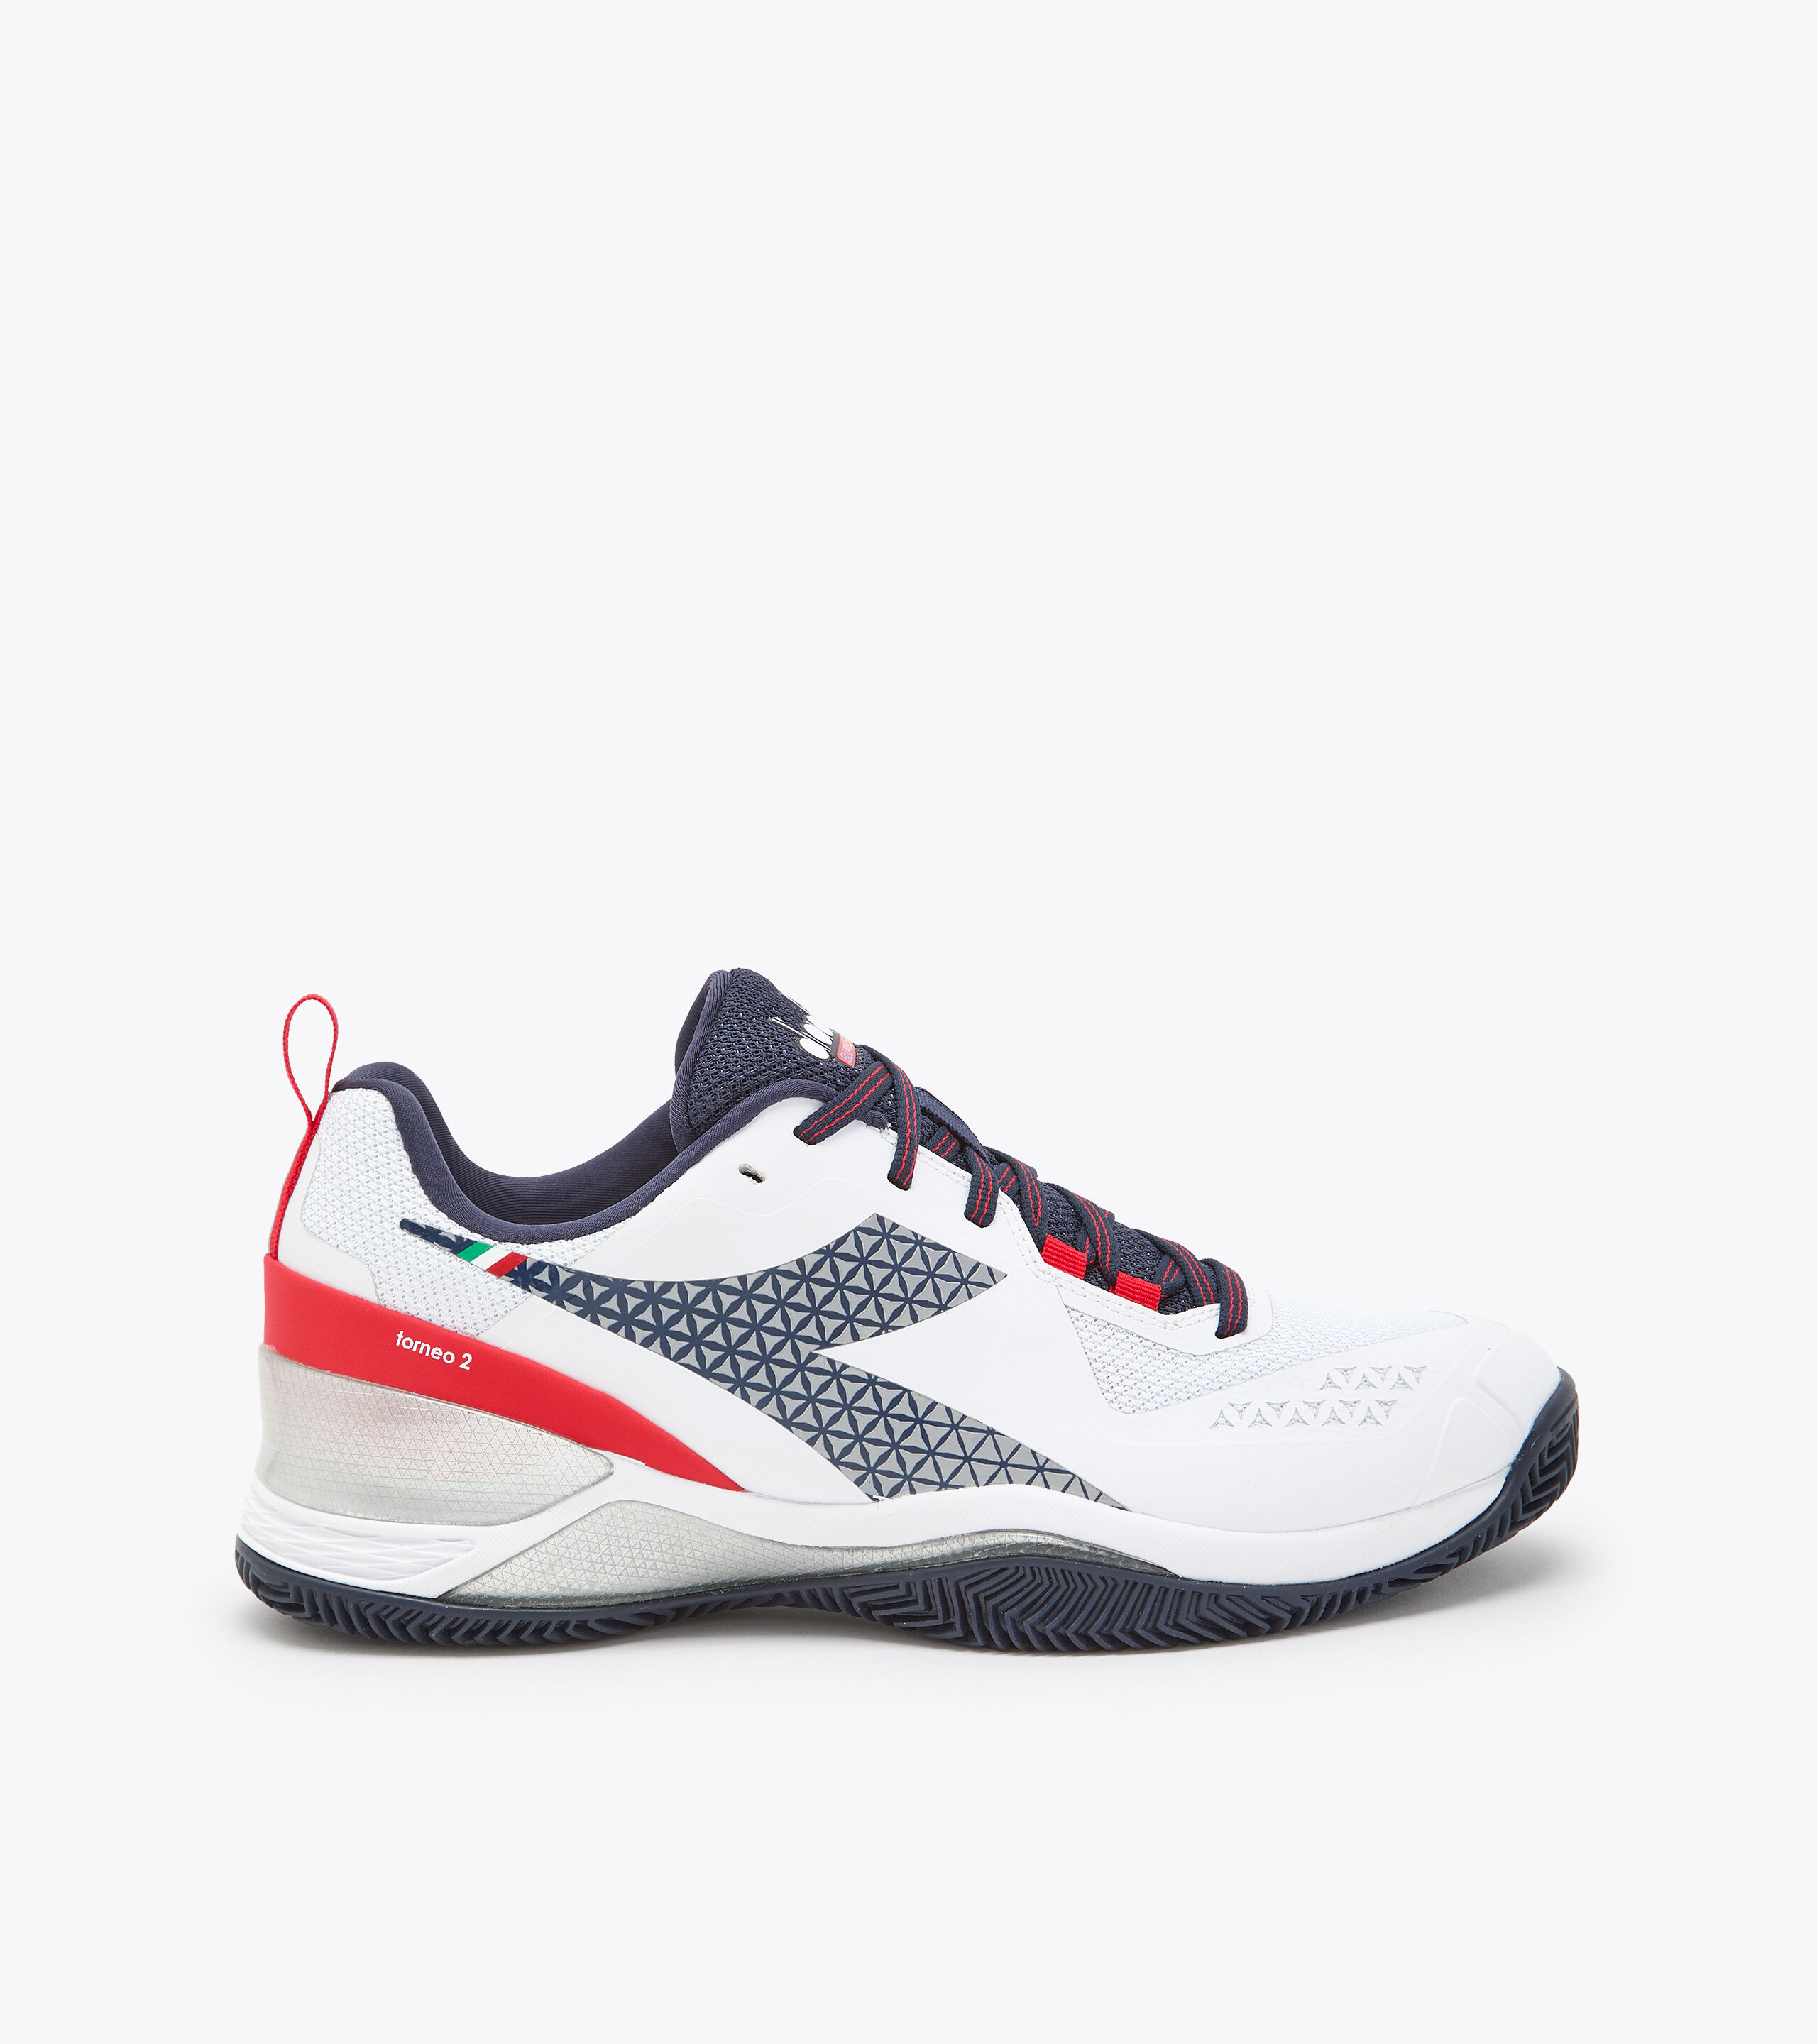 BLUSHIELD TORNEO 2 CLAY Tennis shoes for clay court - Men